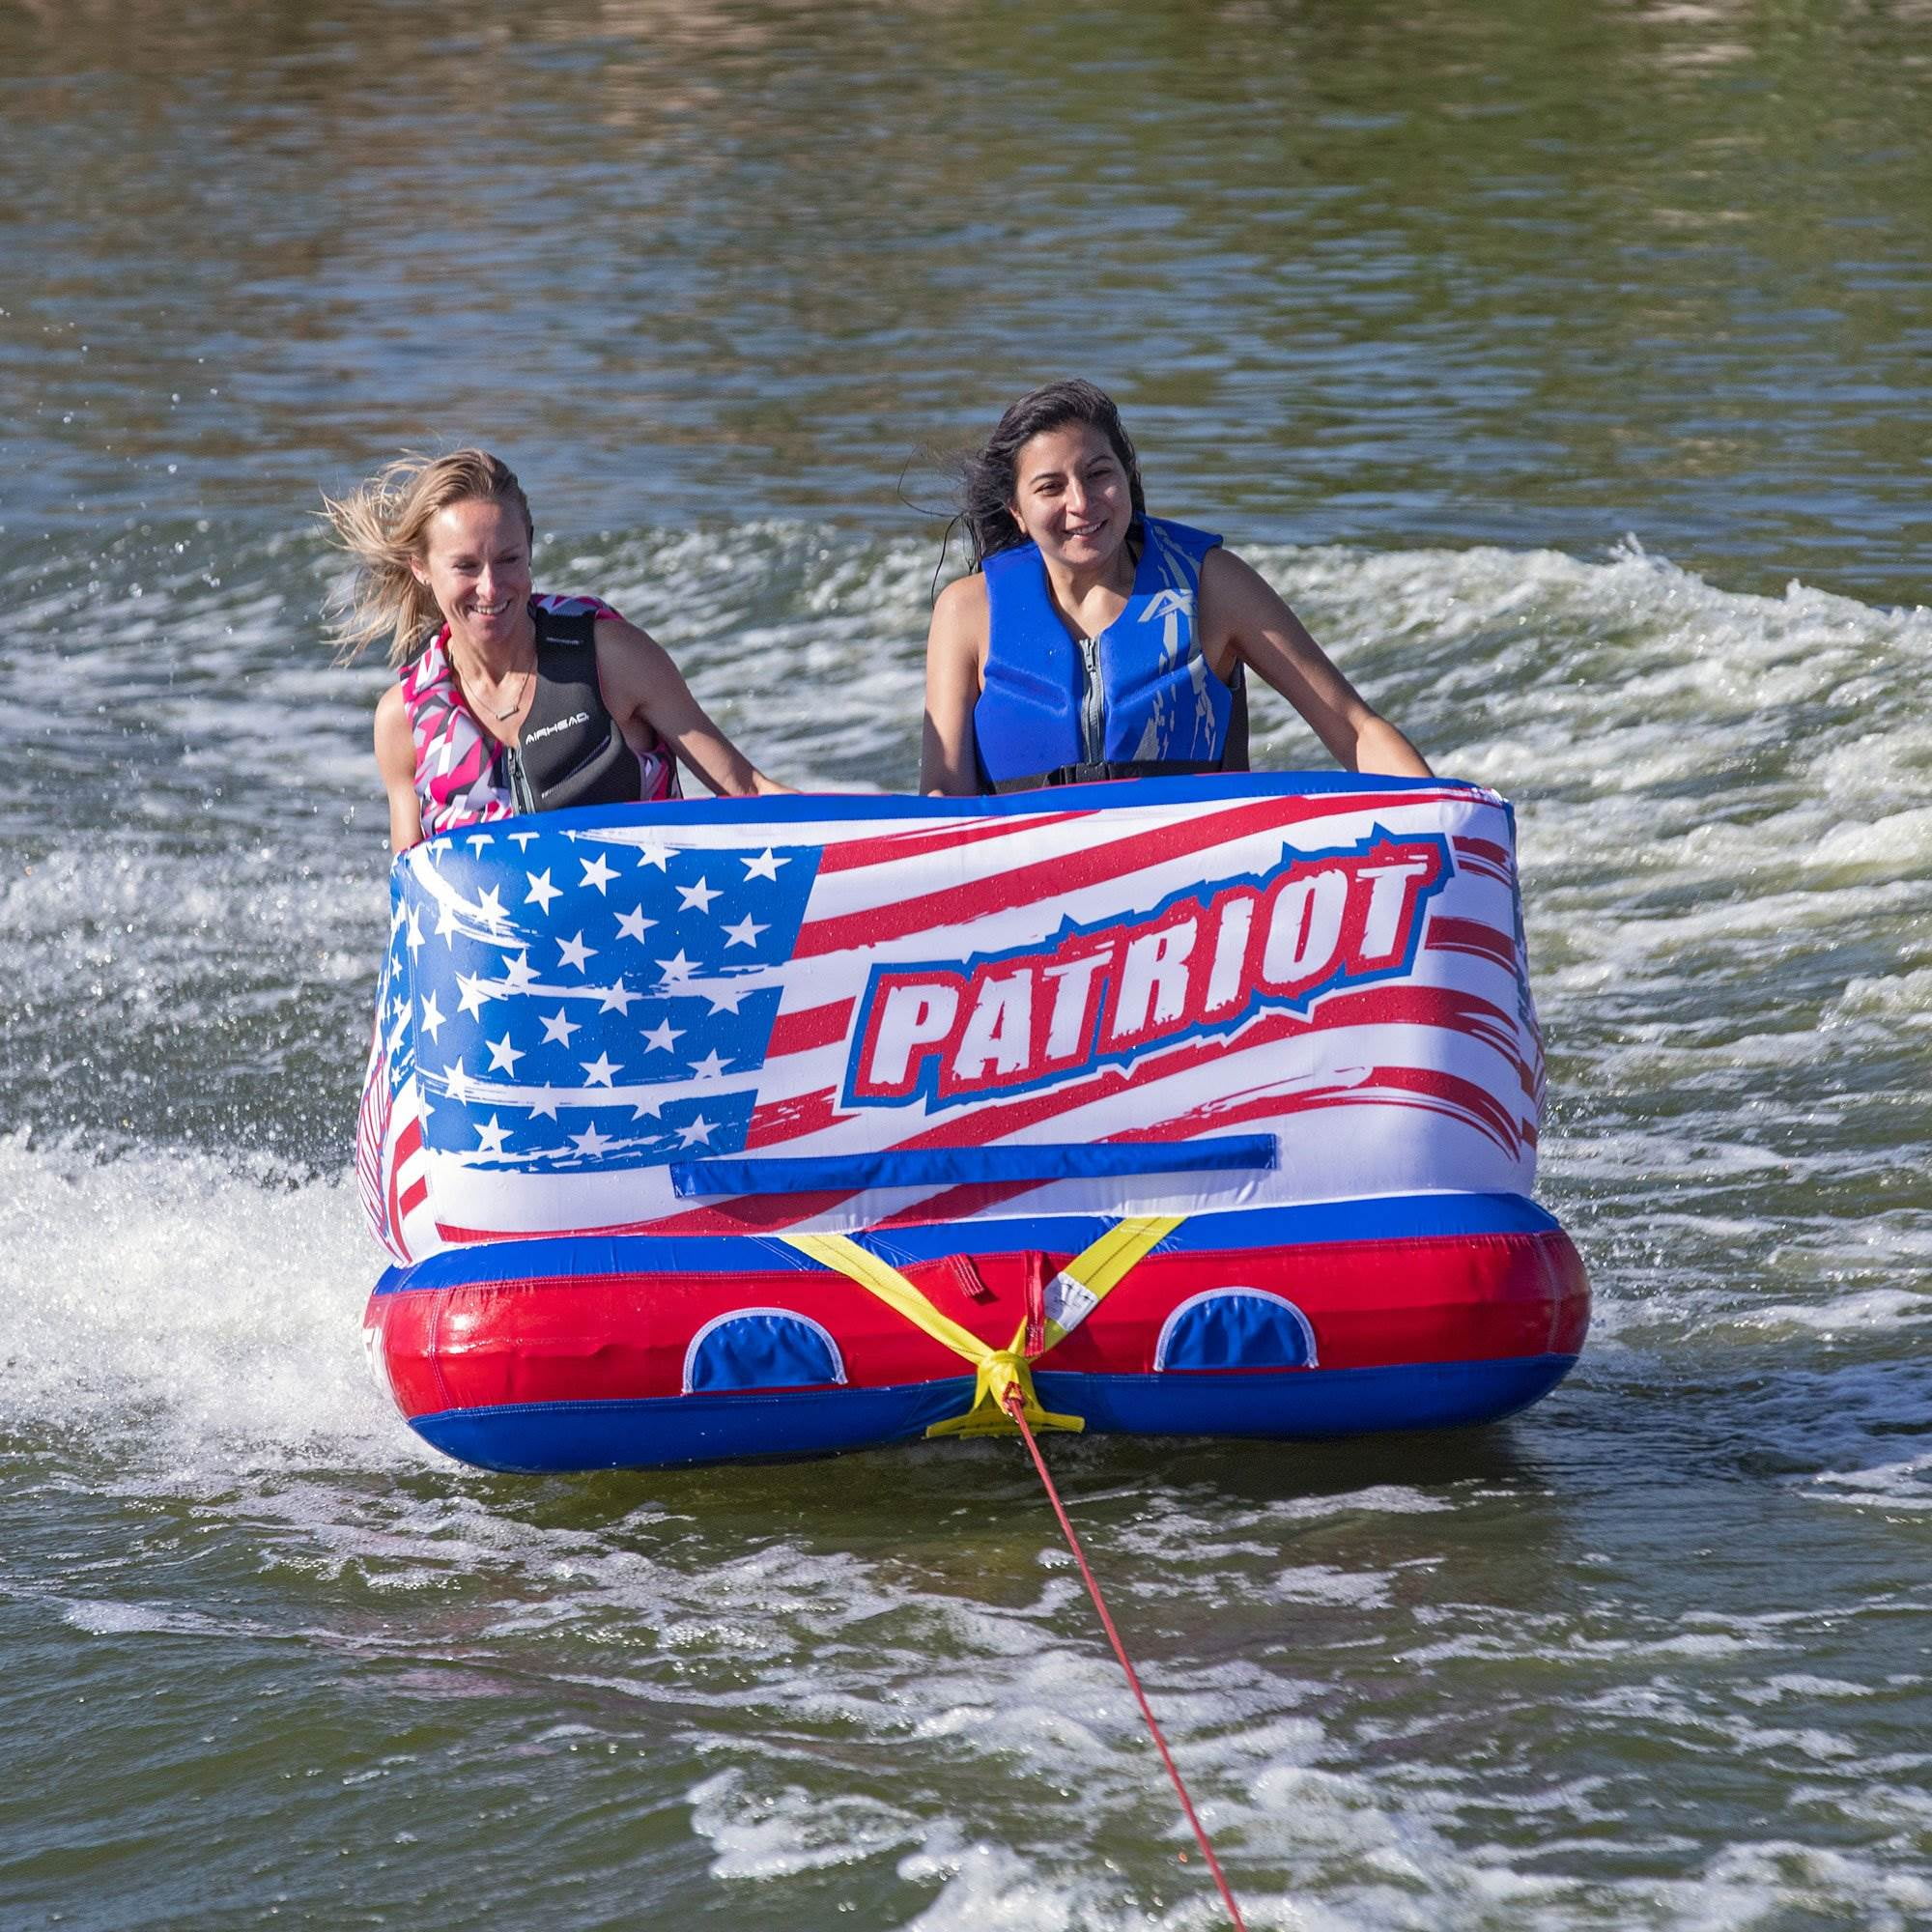 Details about   Airhead Patriot 2-Person Towable Kwik-Connect Chariot Tube w/ Rope Floater 